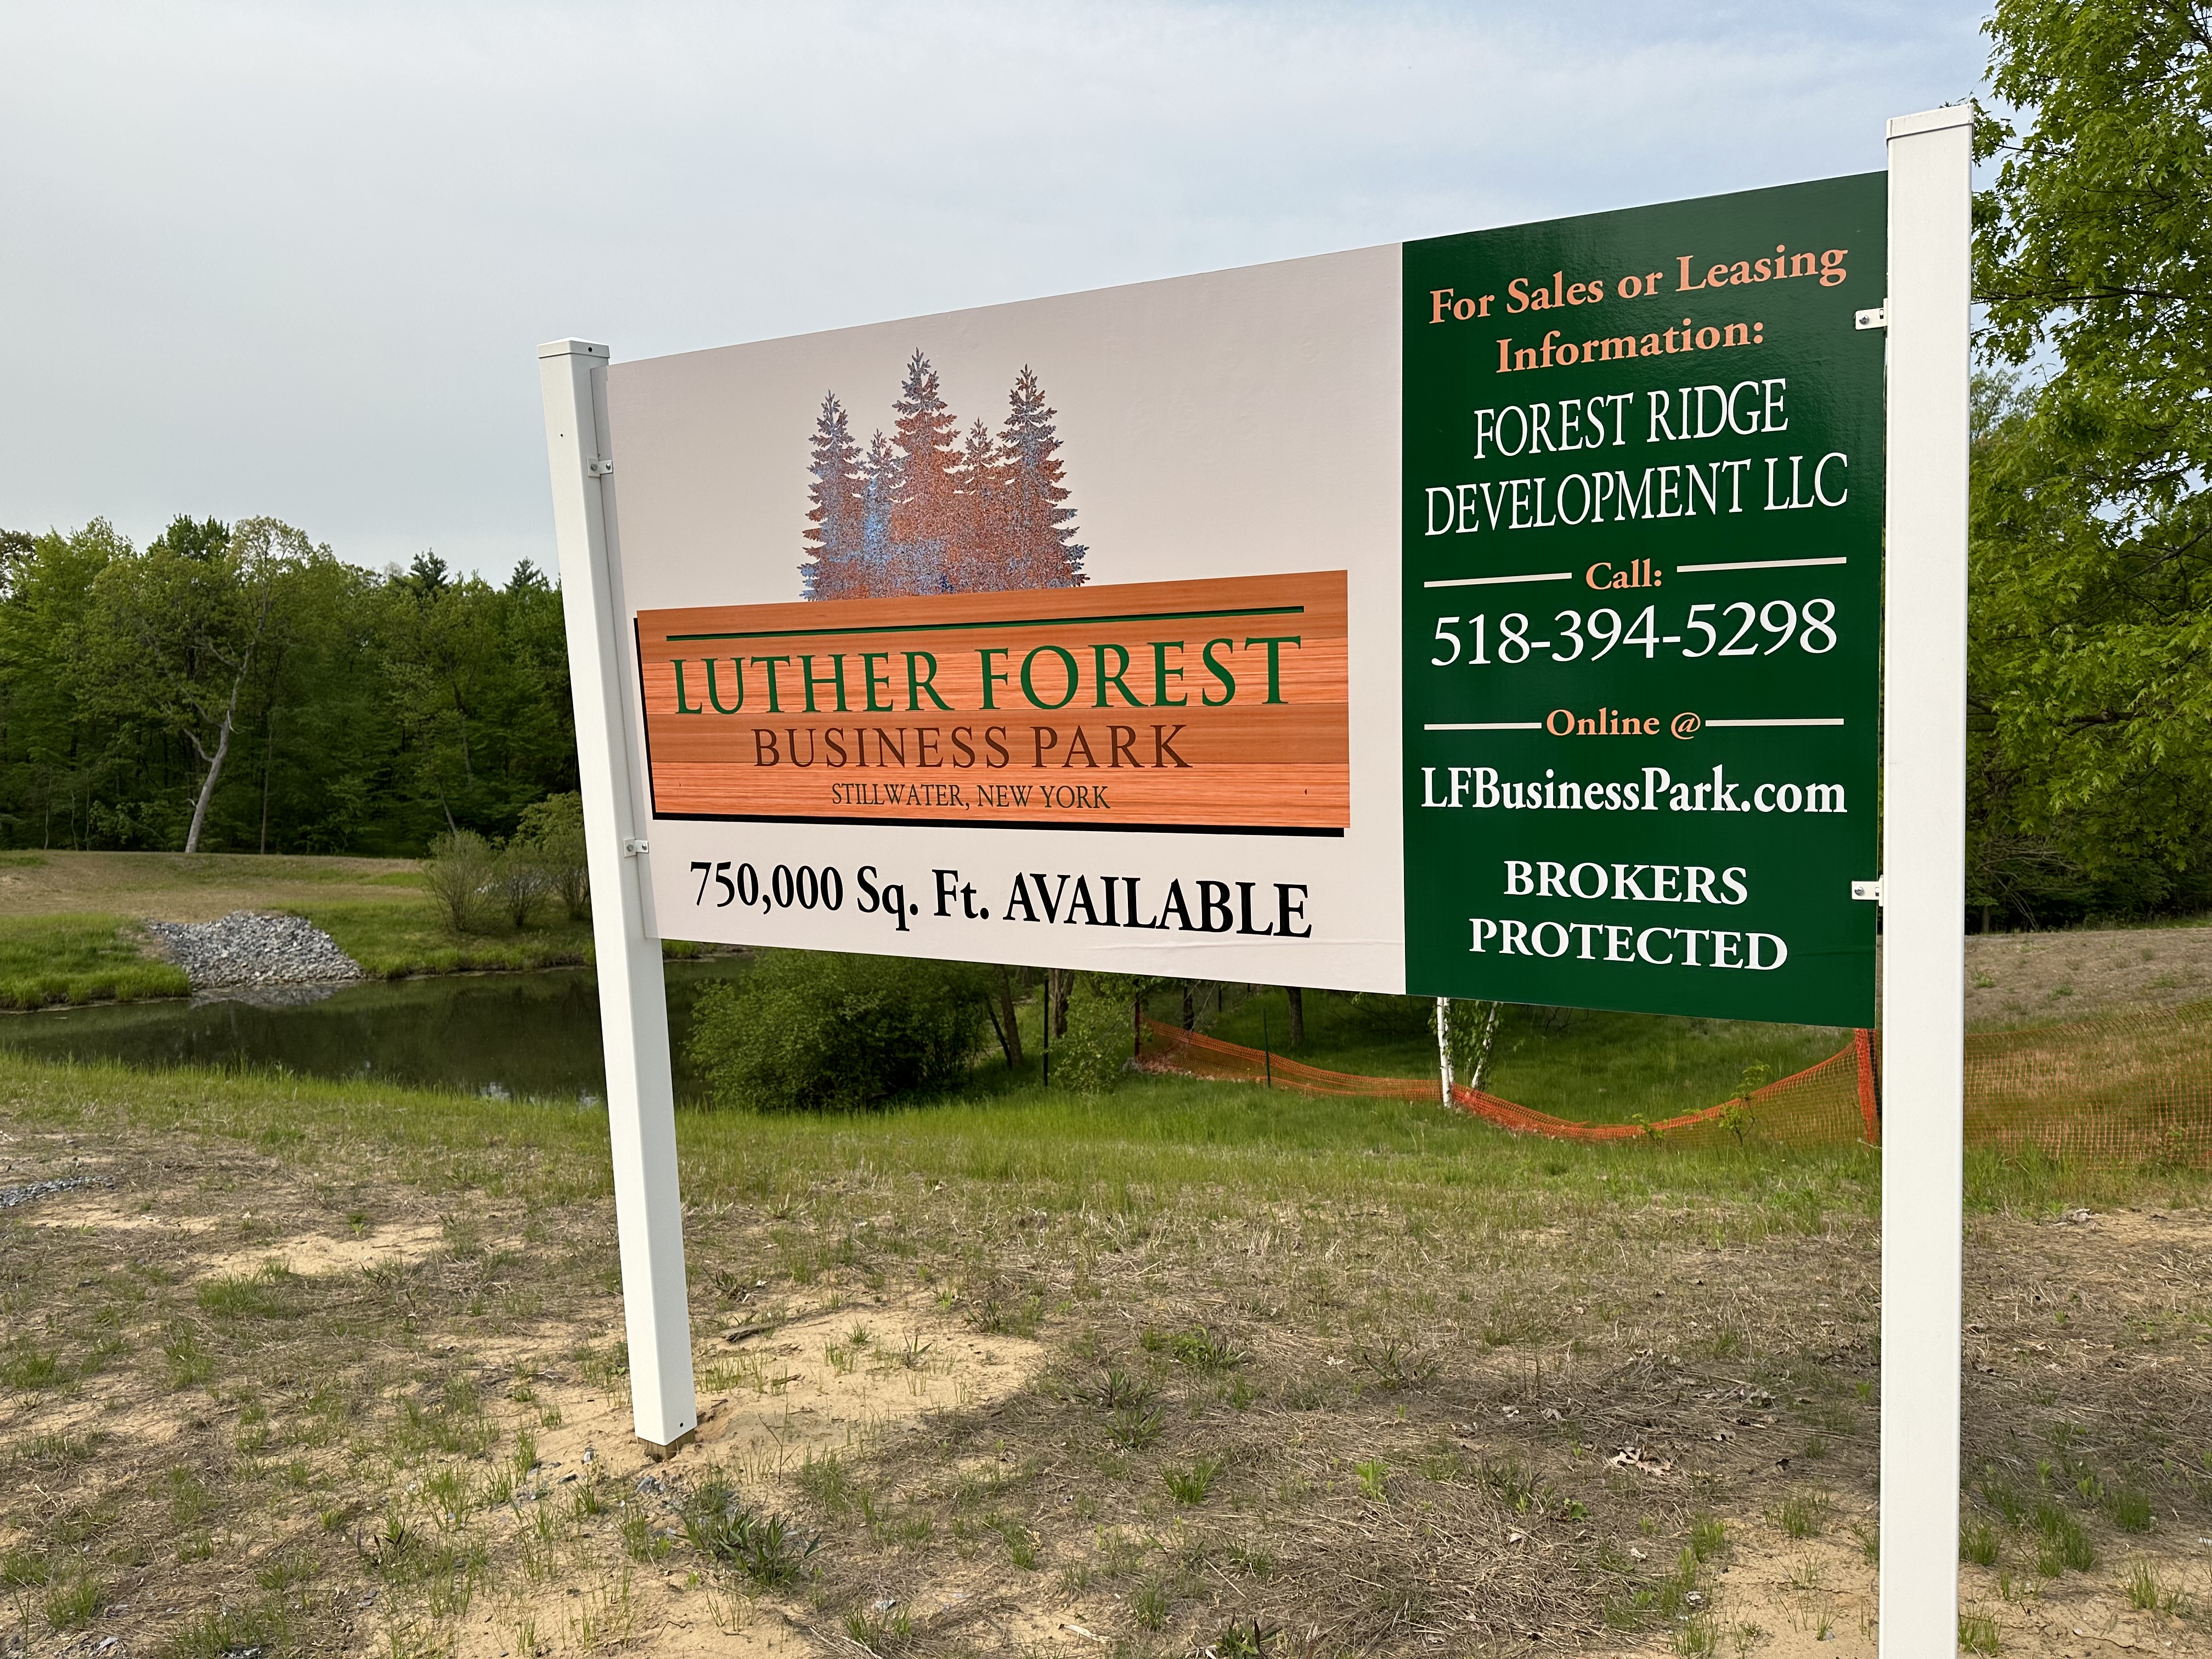 White Pines Business Suites to break ground at new Luther Forest Business Park